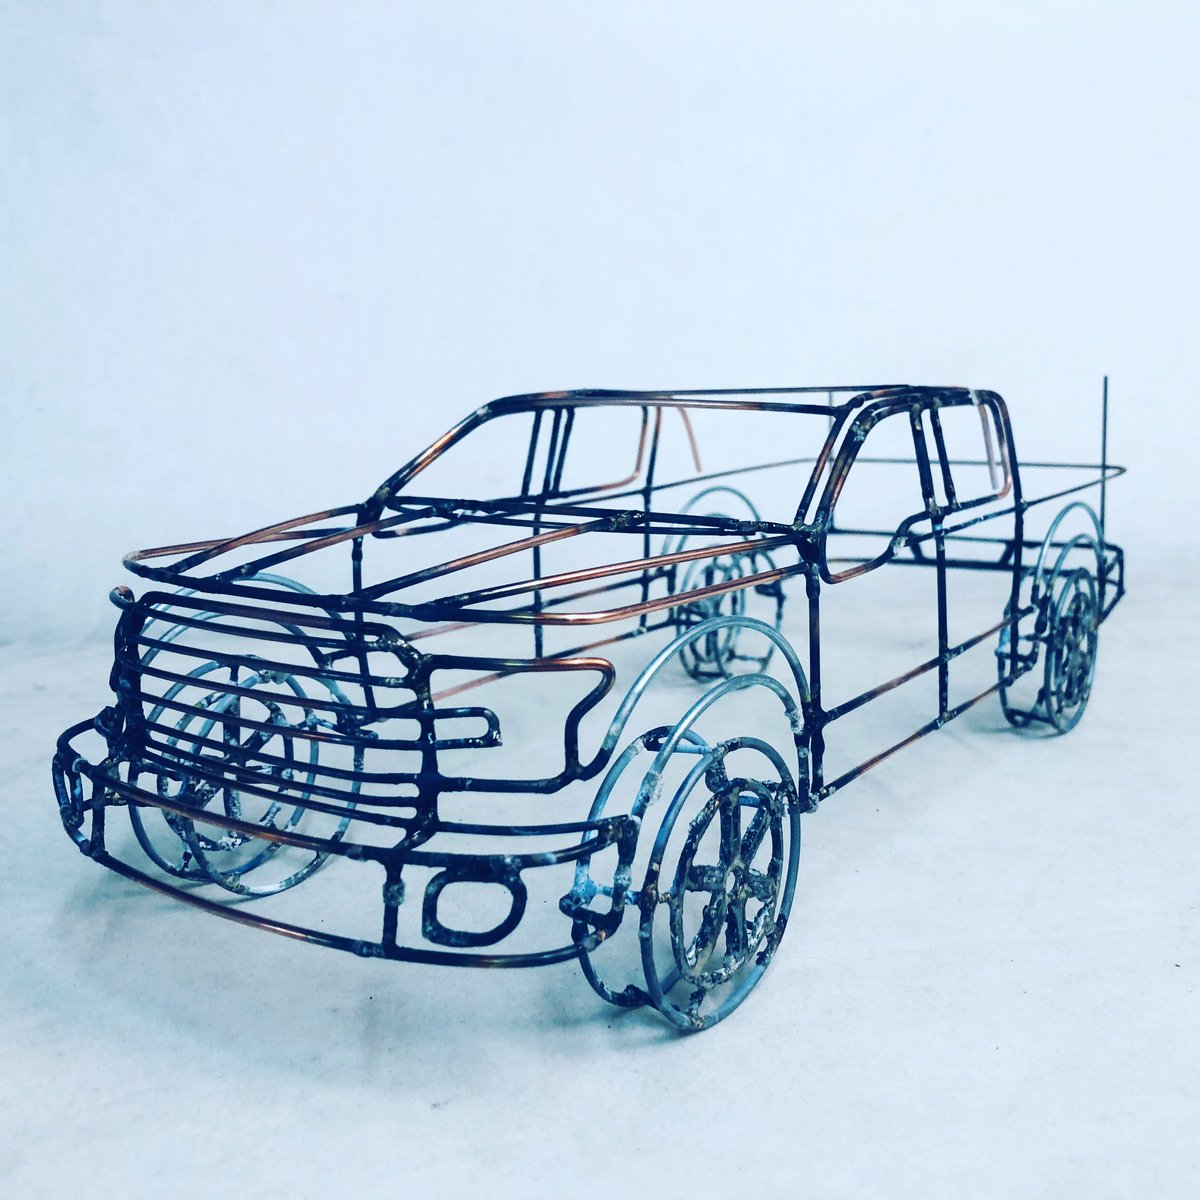 FORD F150. FIRST WIREFRAME MODEL IN SIZE 1:18!!
#carufer #wireframes #ford #f150 #f150raptor #fordf150 #fordoffroad #fordf150raptor #fordmustang #fordowners #fordownersclub #f150owners #followme #likeback #fordartists #fordart #likeforlikes #offroad #offroad4x4 #4x4 #offroadtruck